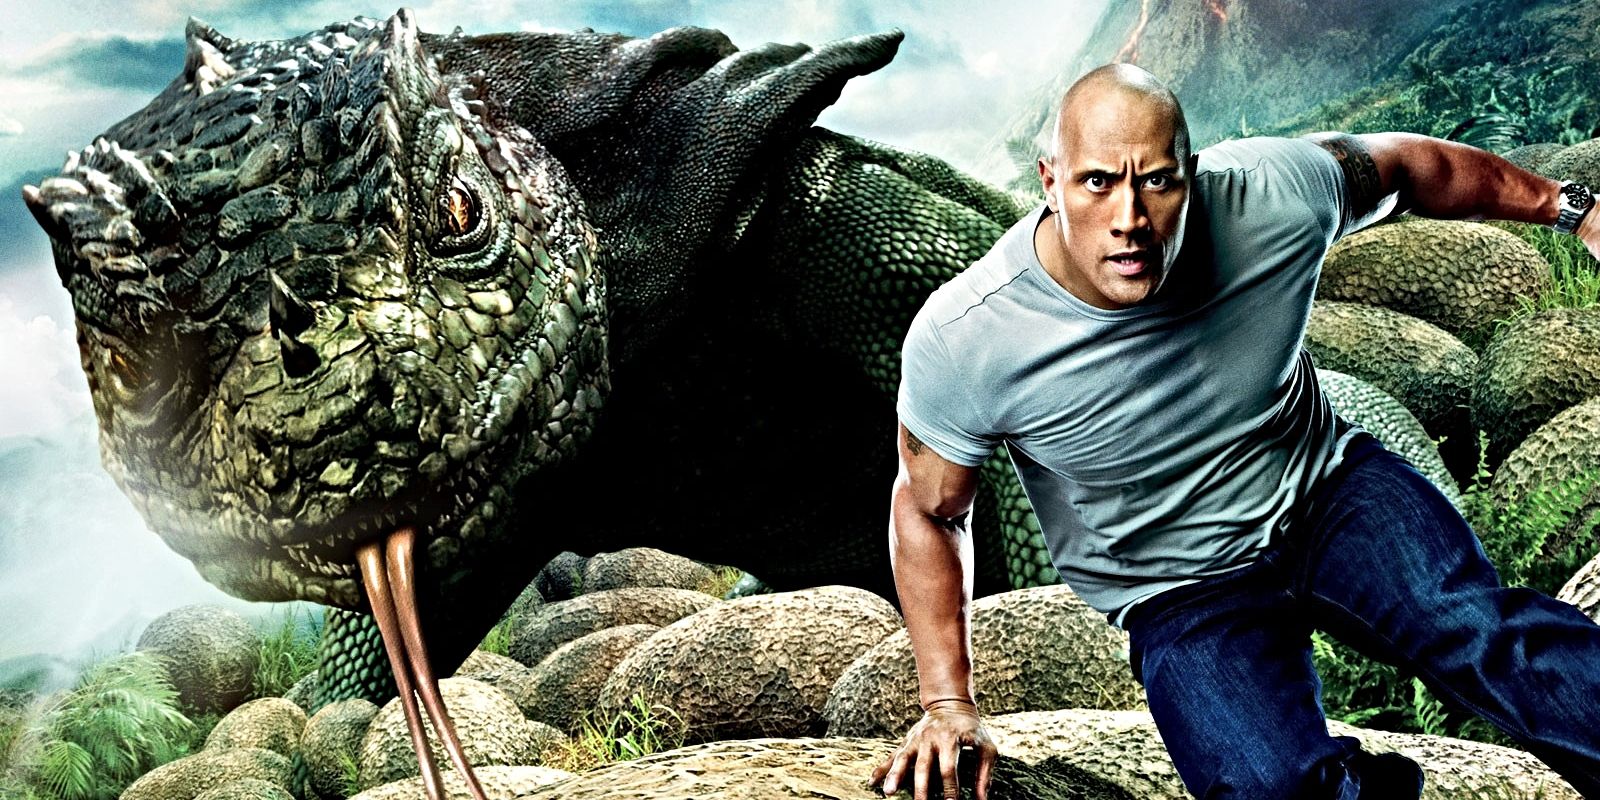 Dwayne Johnson runs away from a giant lizard on the poster for Journey 2: The Mysterious Island.